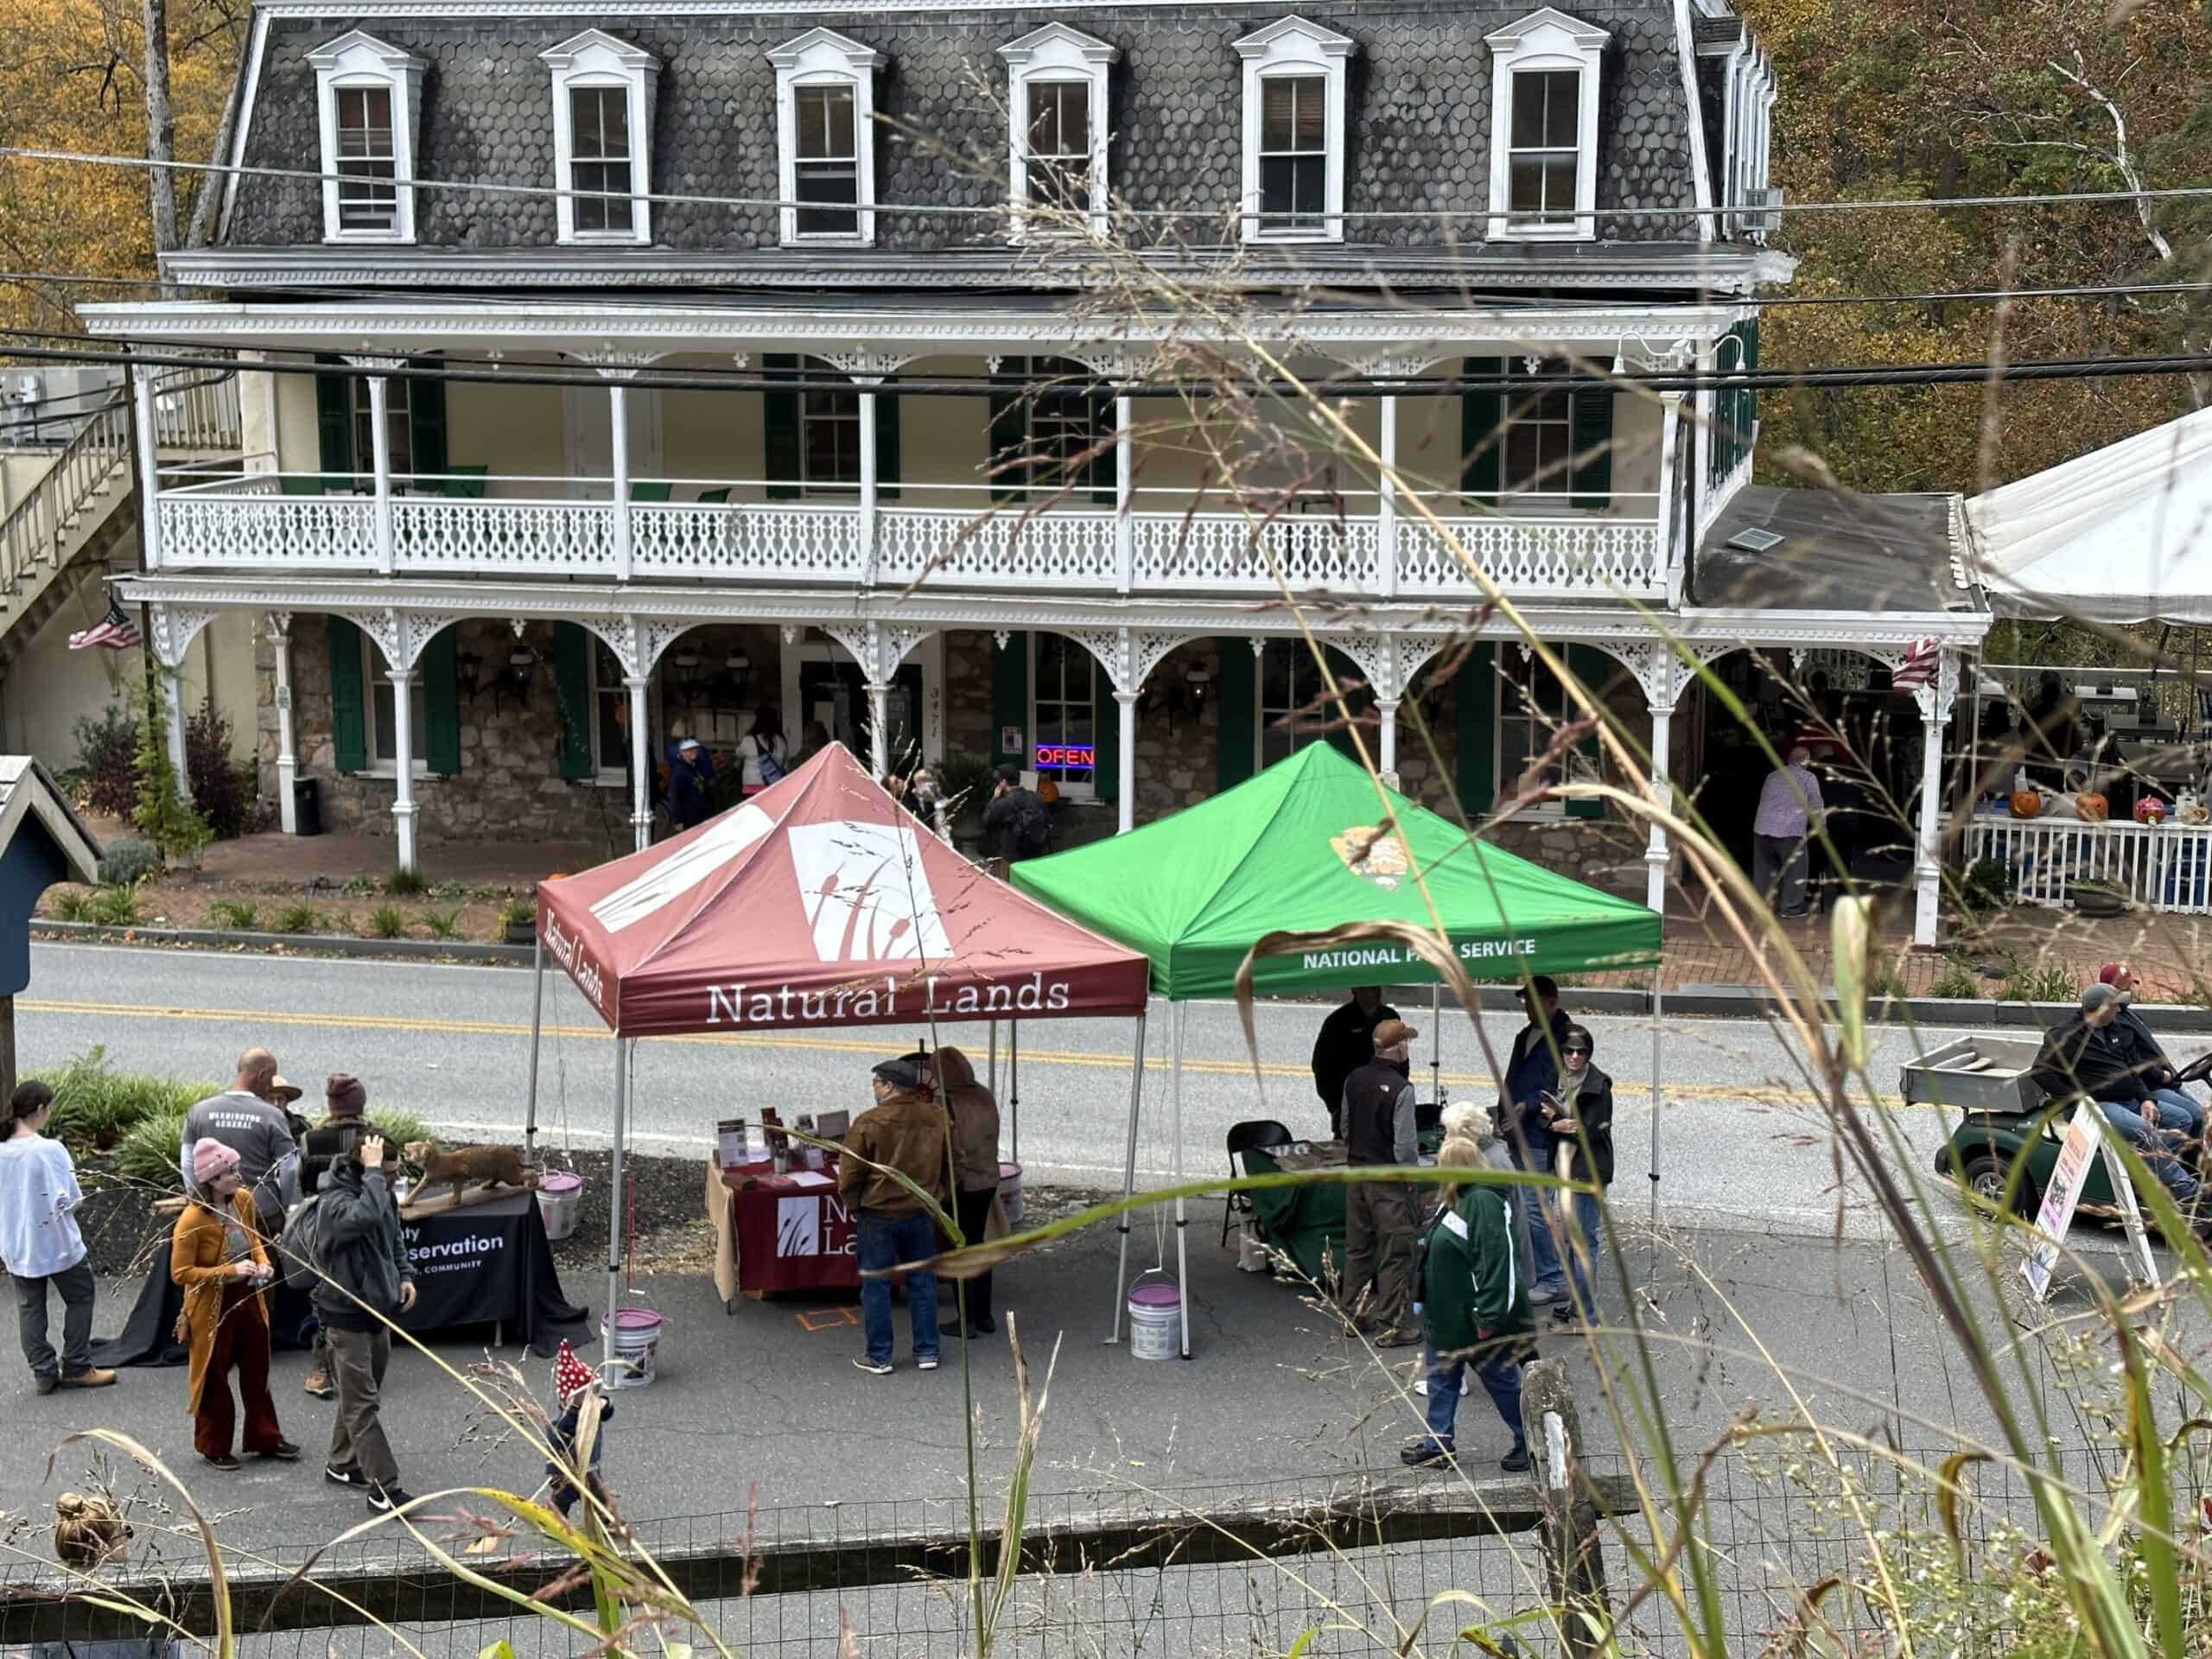 Two pop-up tents in front of the St. Peter's Inn for a village festival